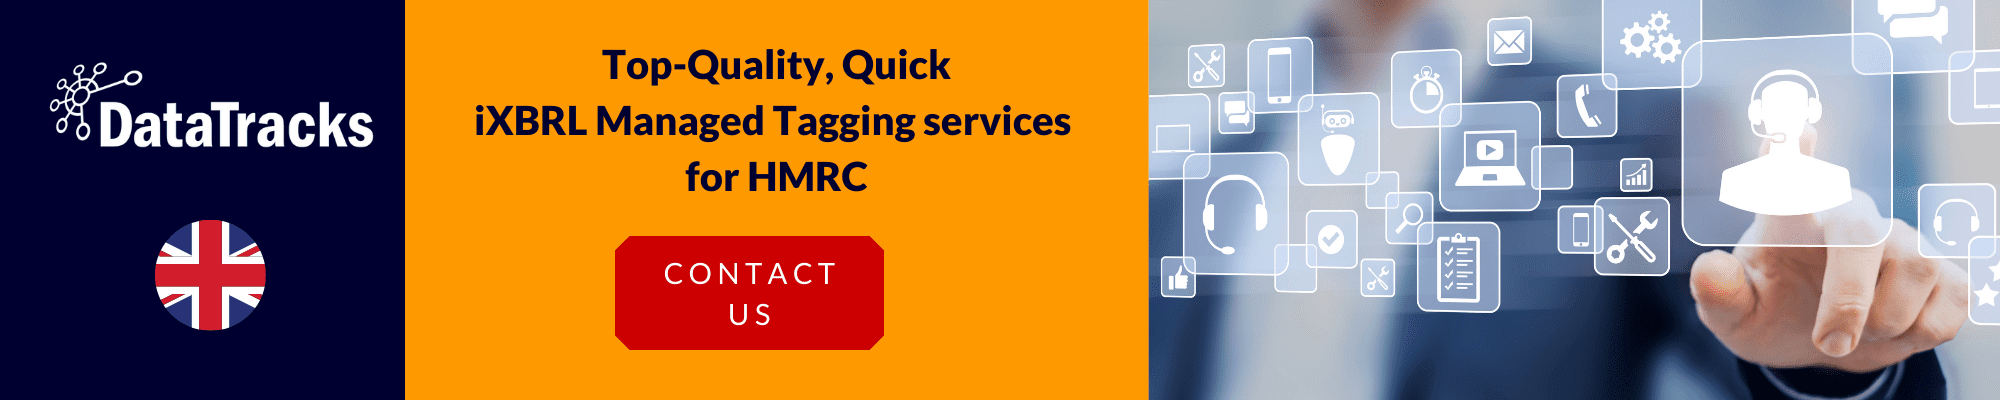 iXBRL managed tagging services for HMRC